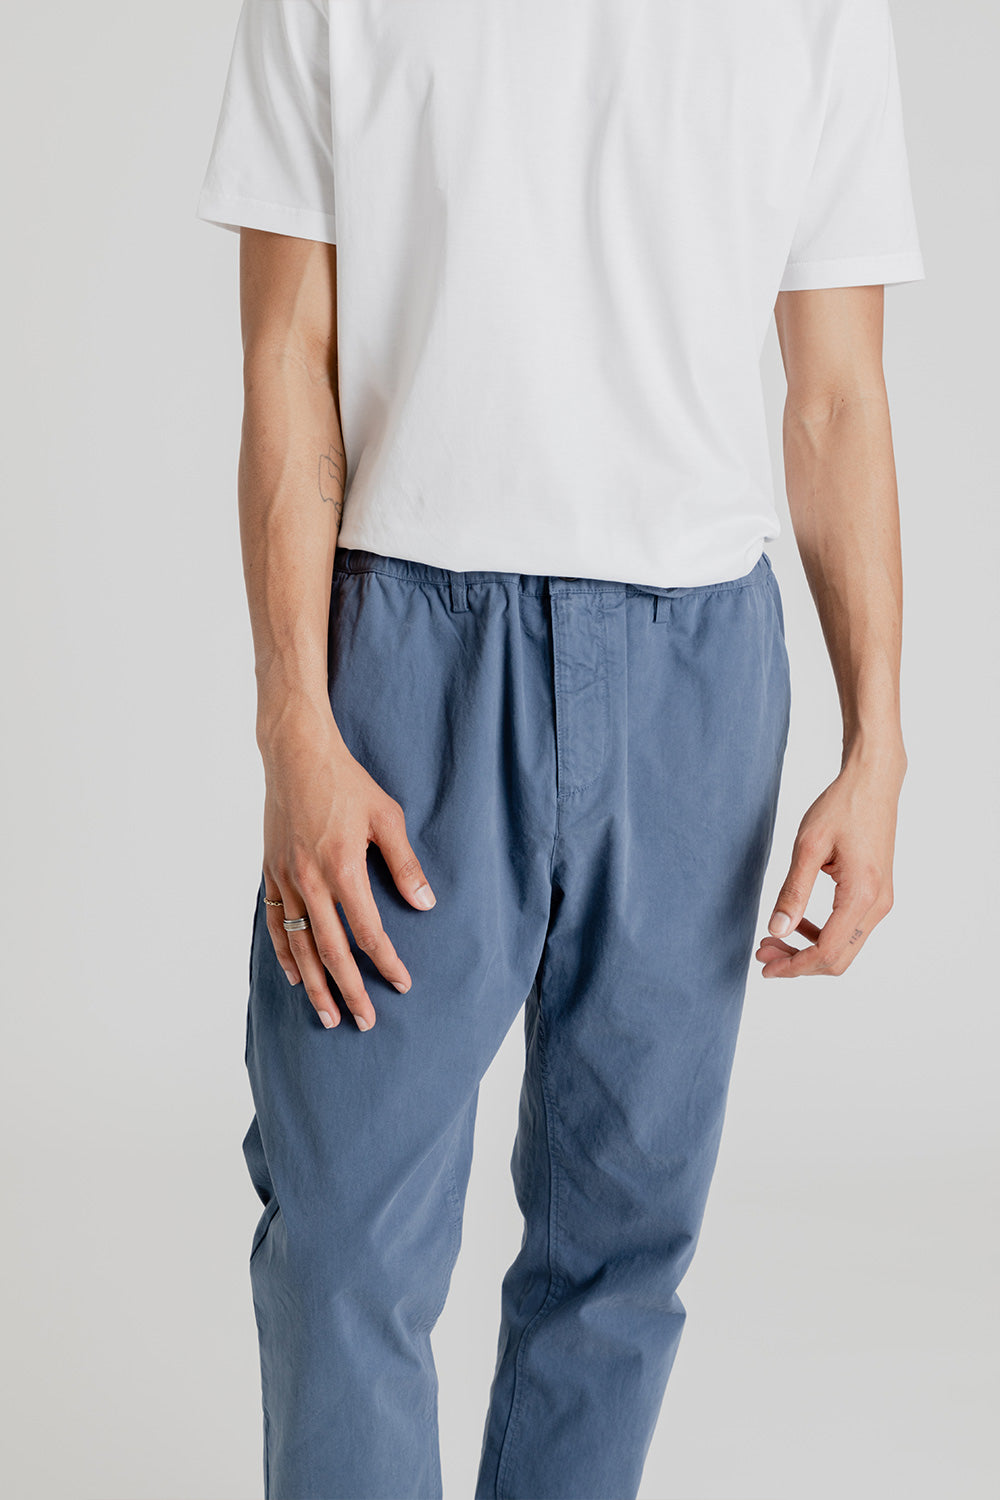 Kestin Inverness Twill Trouser in French Blue